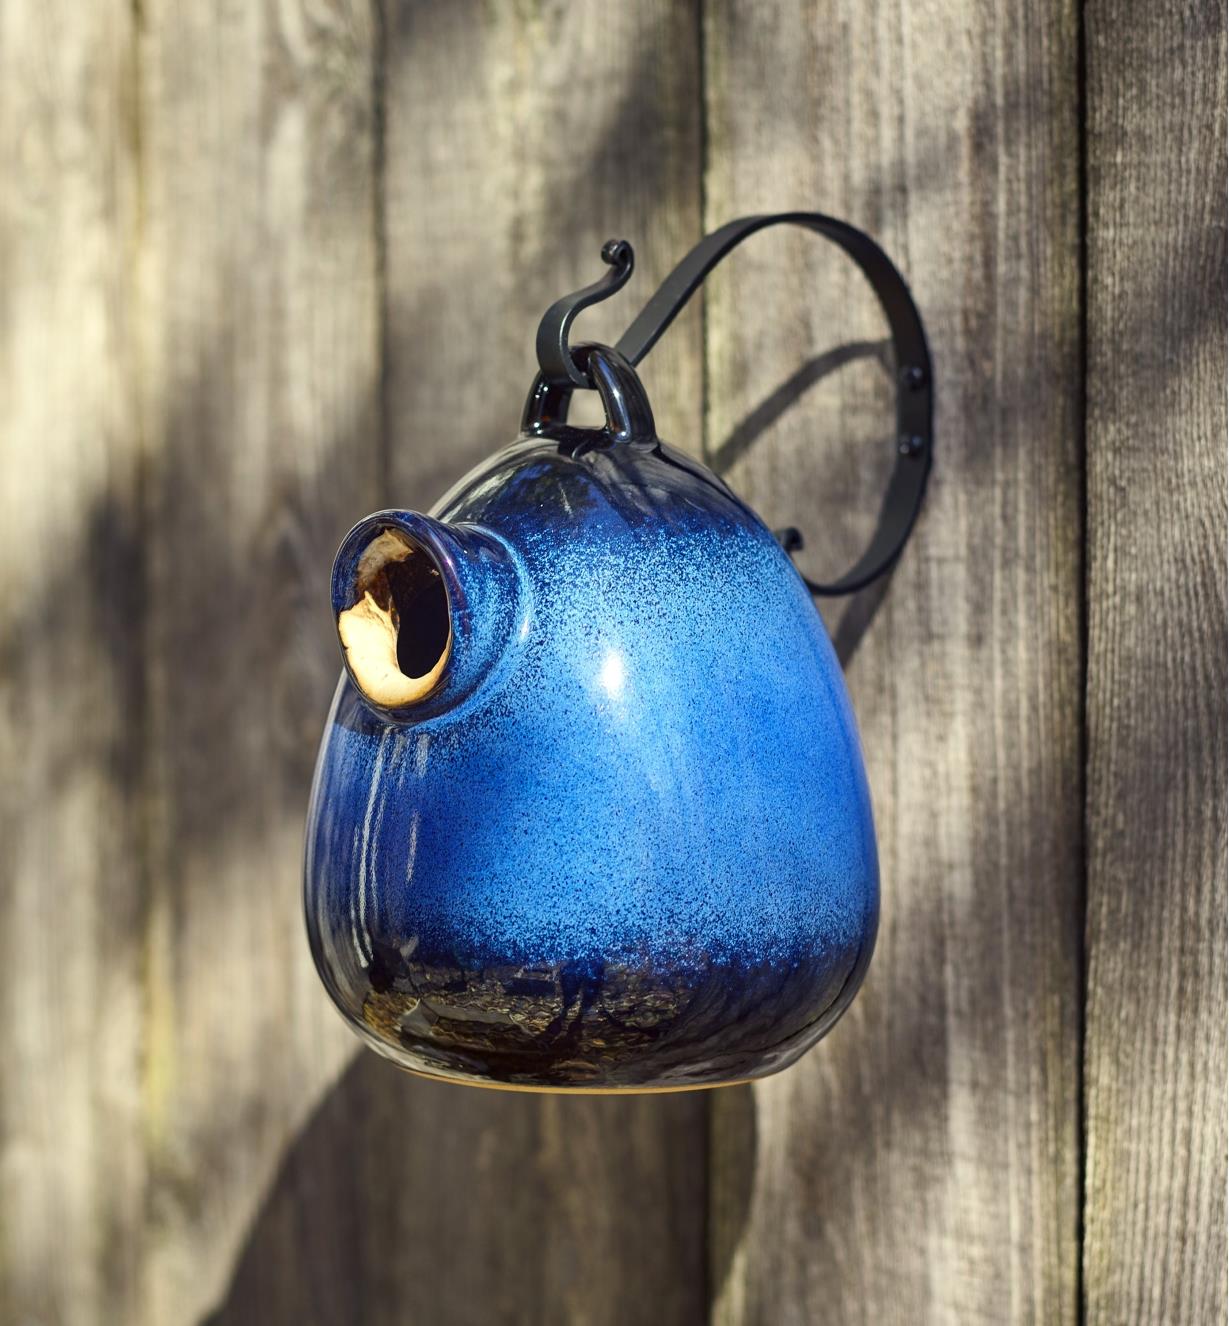 The ceramic bird home suspended from a hanger mounted on a wall